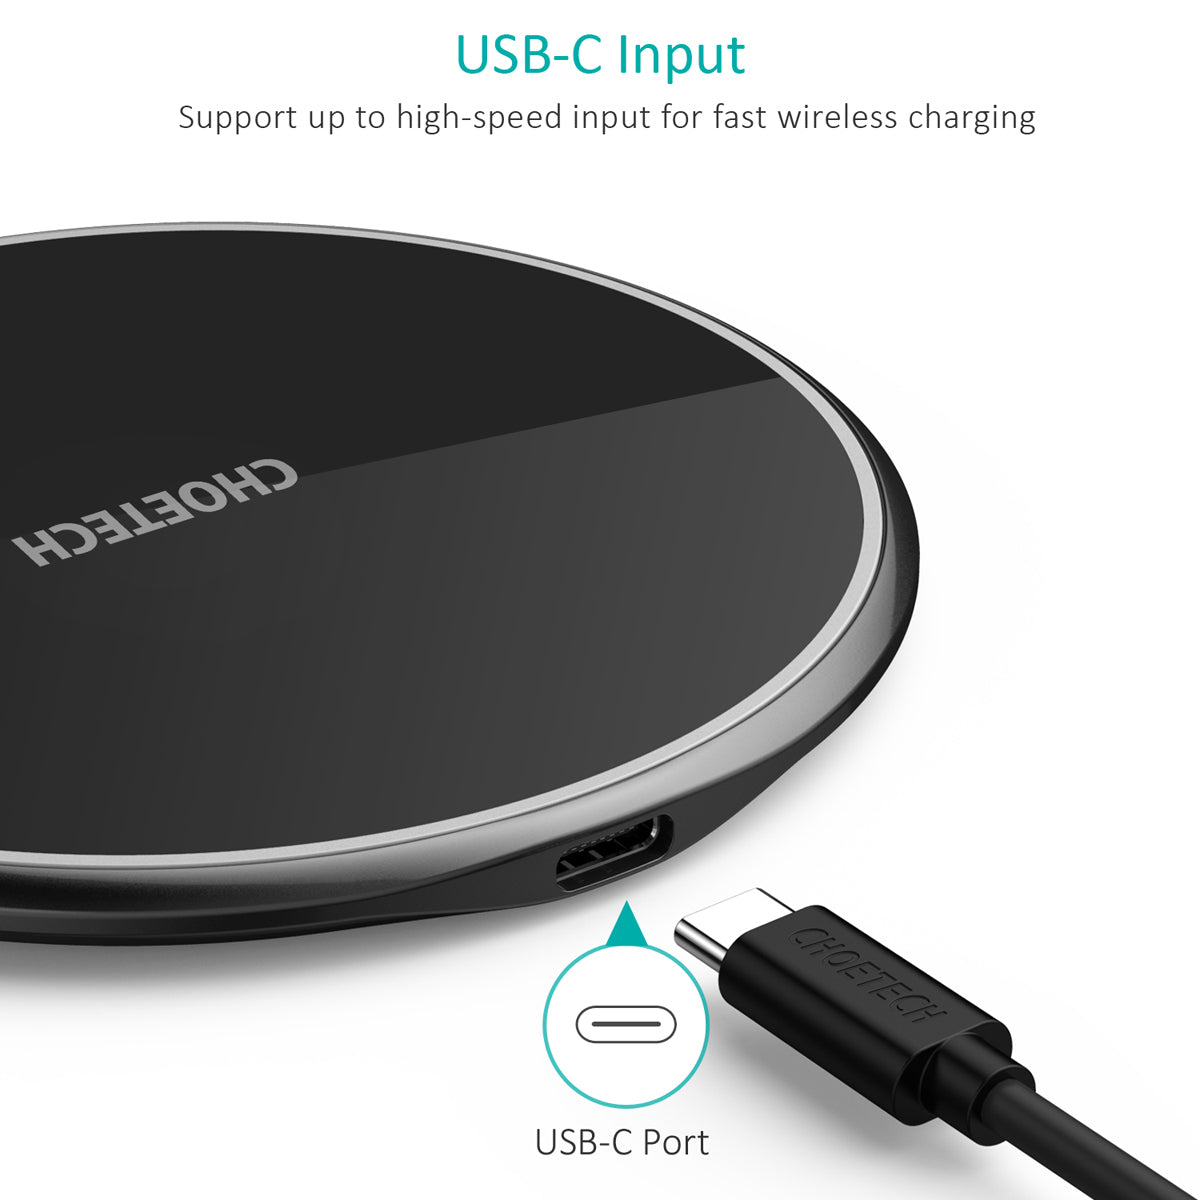 T559-F CHOETECH USB-C 15W Wireless Charger, Zinc Alloy Glass Wireless Charging Pad with Adapter Compatible LG V30/V35/G8,iPhone 11/11 Pro Max/Xs Max/XR/X,Galaxy Note 10/S20/S20+,AirPods Pro,Pixel 3/4XL